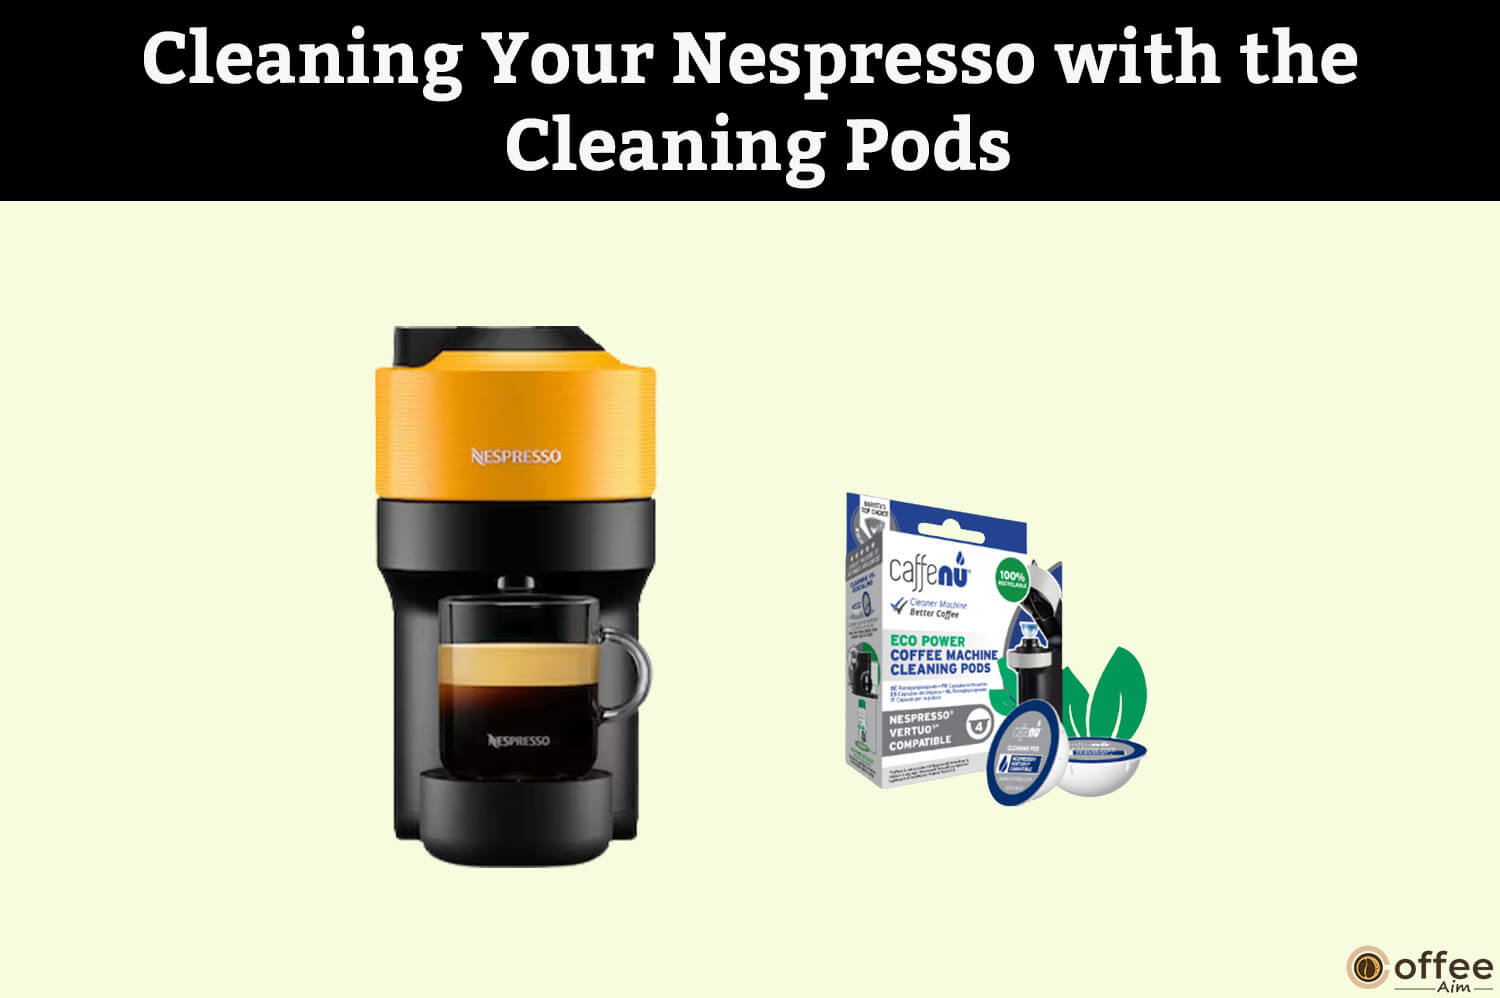 Cleaning Your Nespresso with the Cleaning Pods